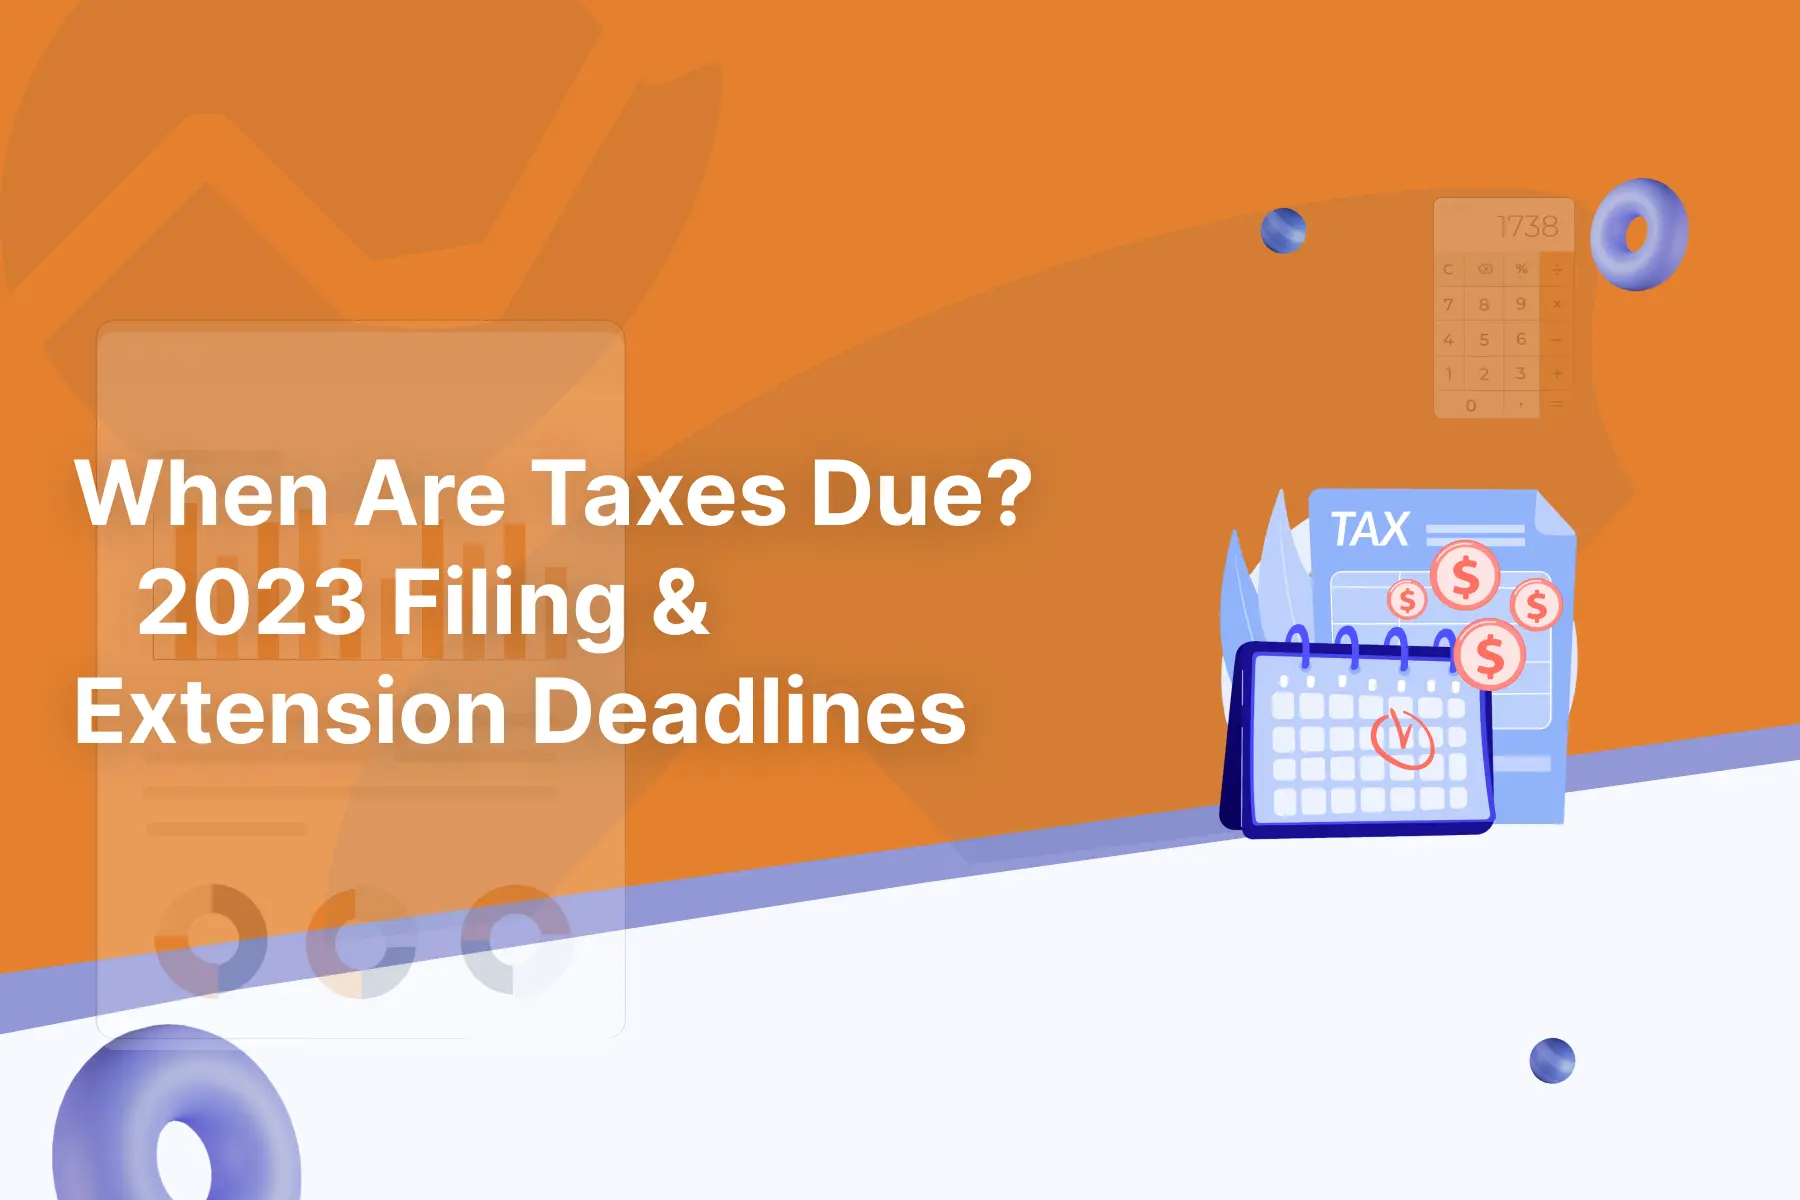 When Are Taxes Due? 2023 Filing & Extension Deadlines